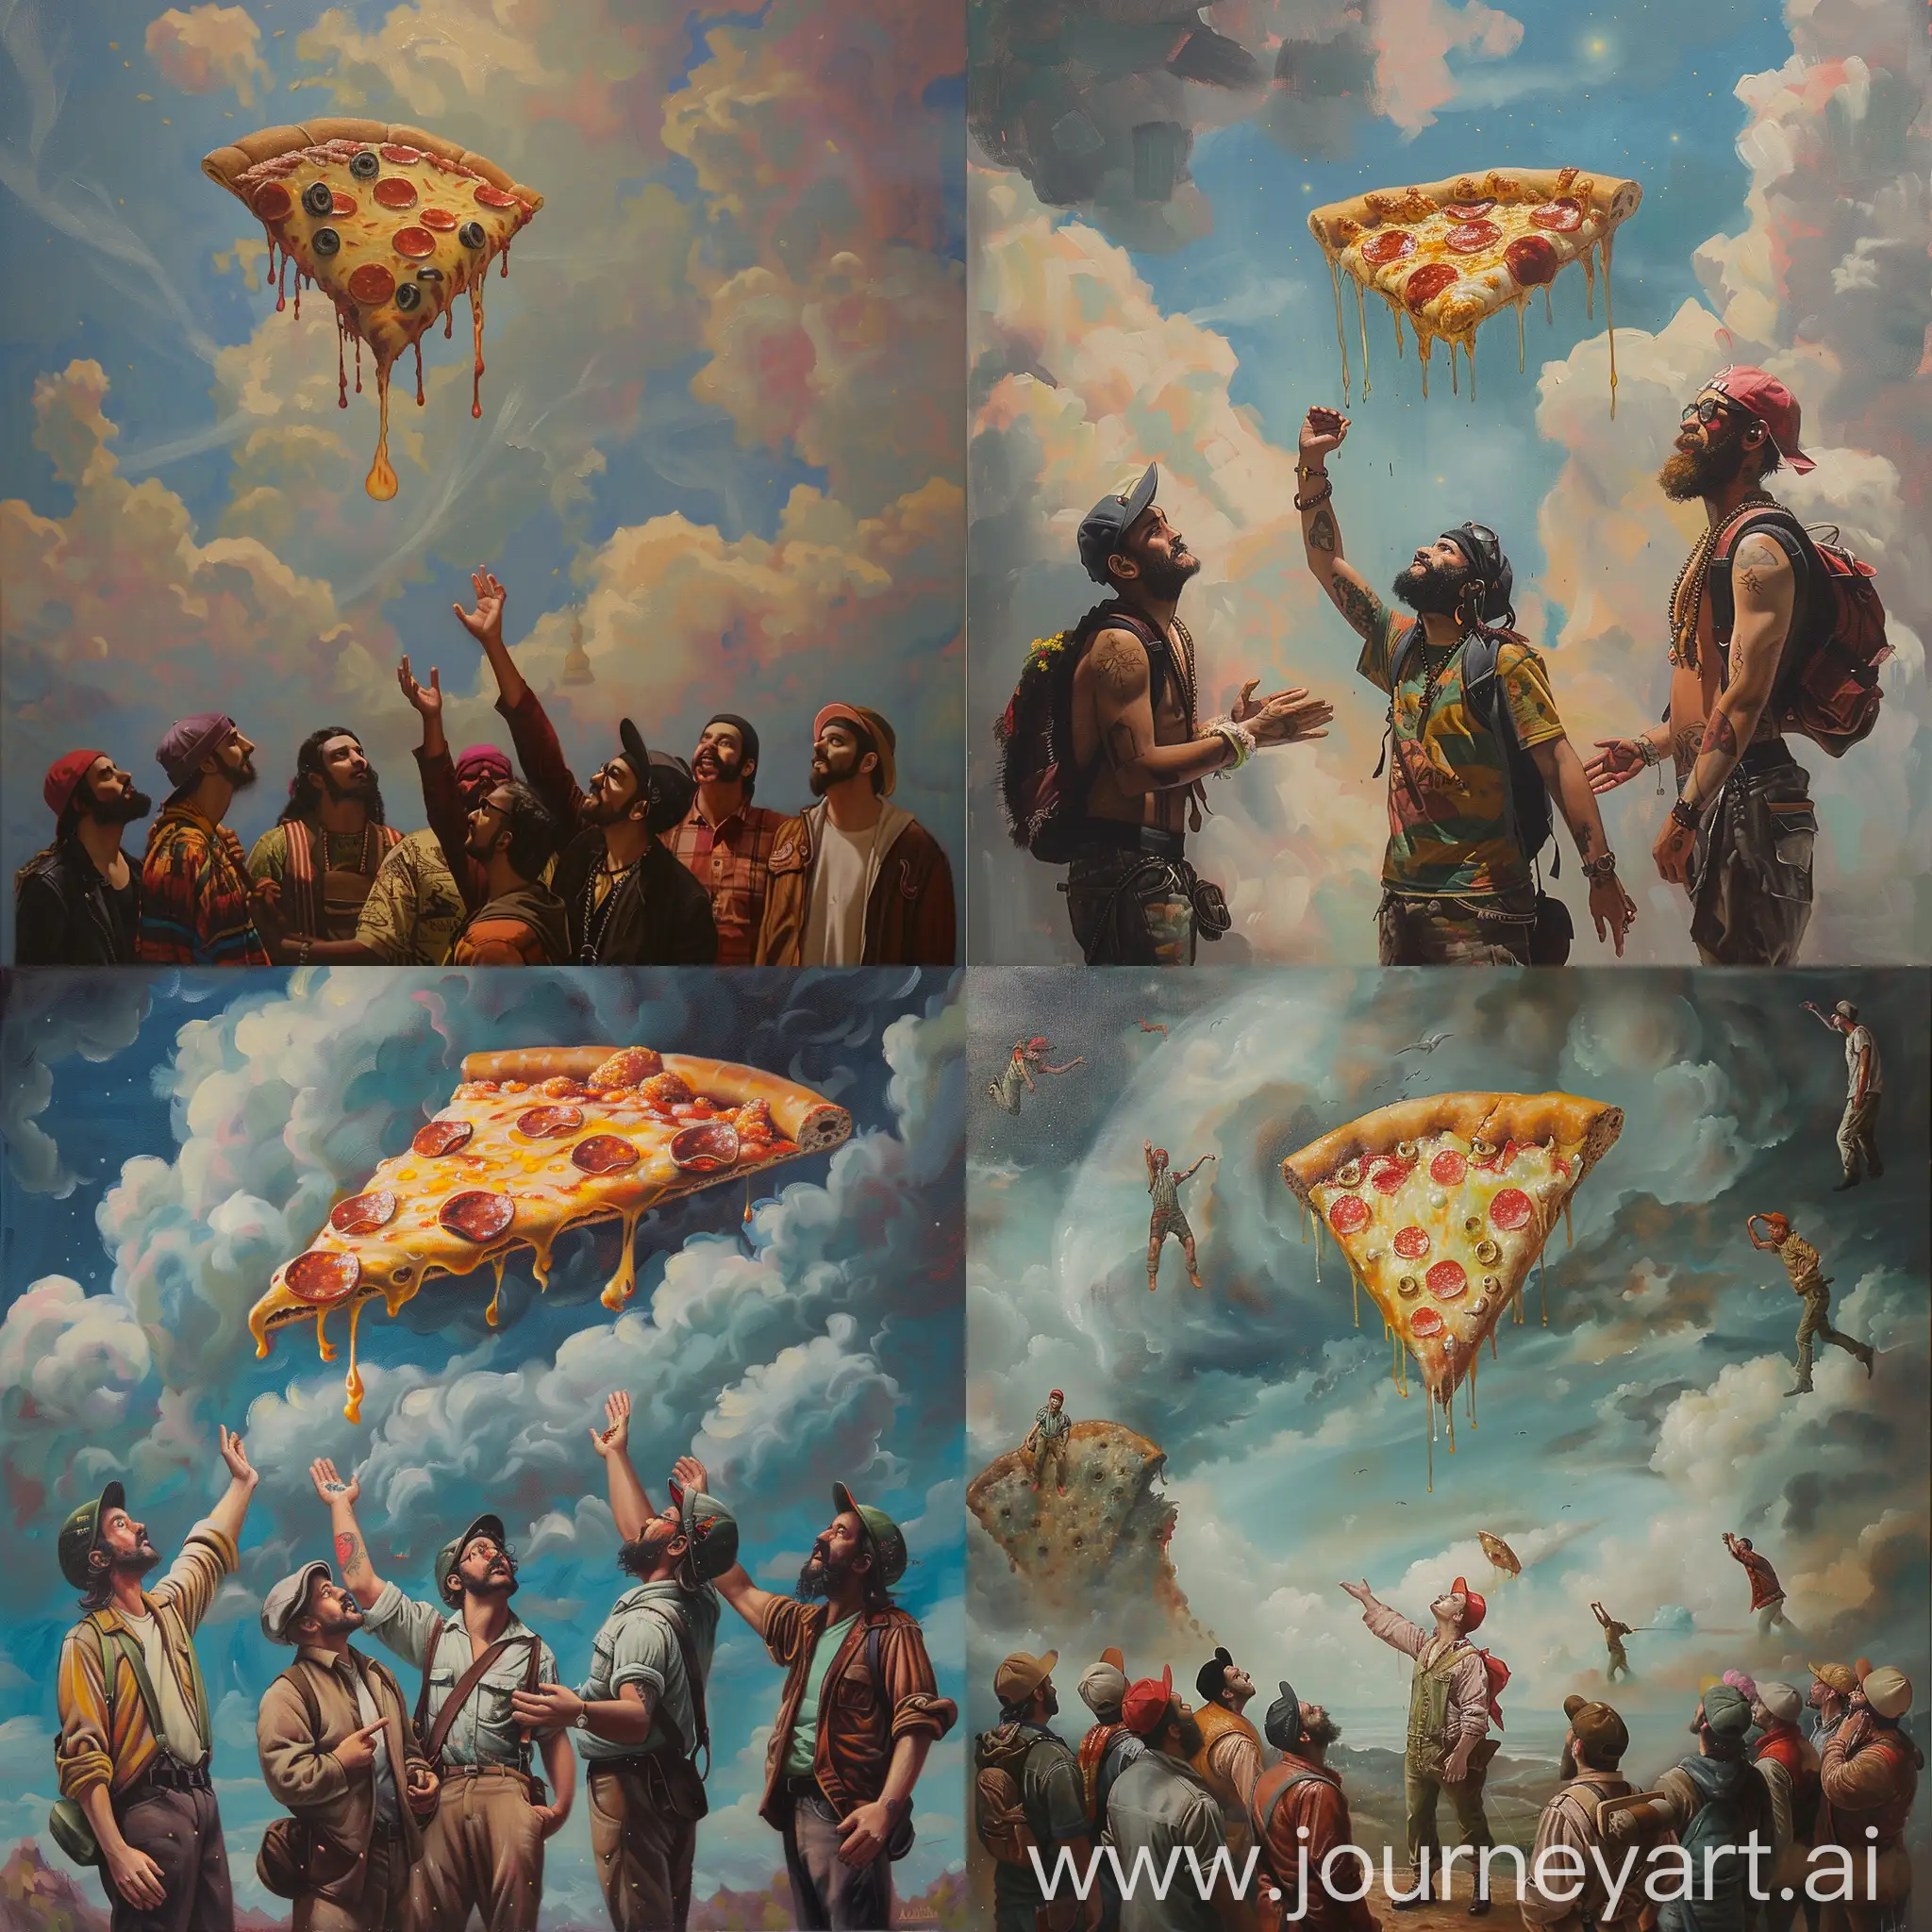 A rococo style oil painting of hipsters worshipping a pizza slice that floats in the sky